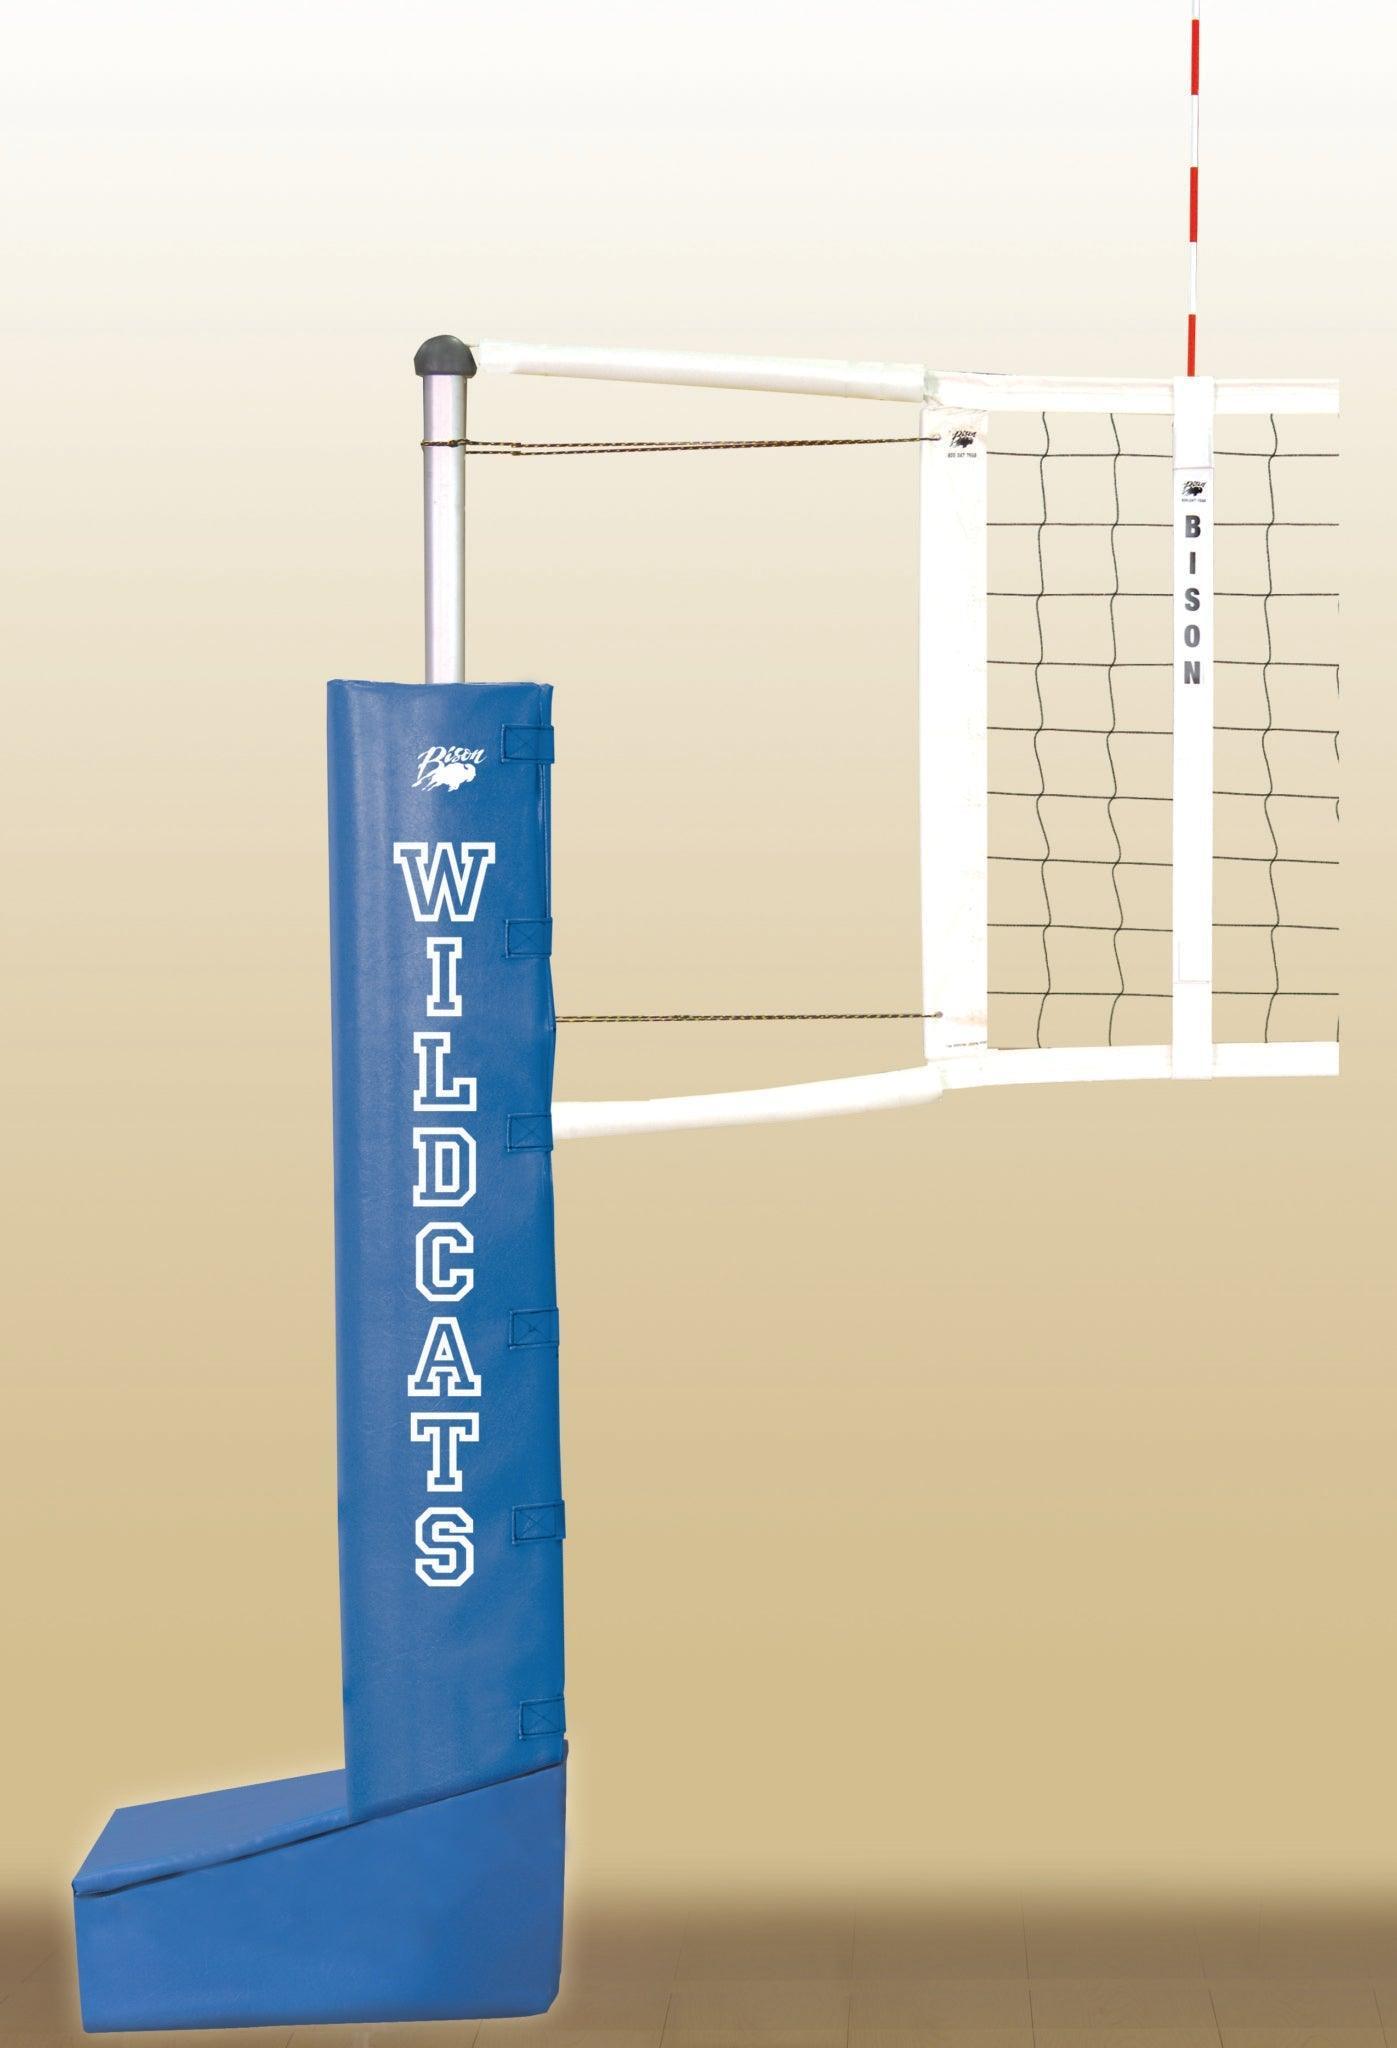 Bison Portable Volleyball System Sold at GameTime Athletics